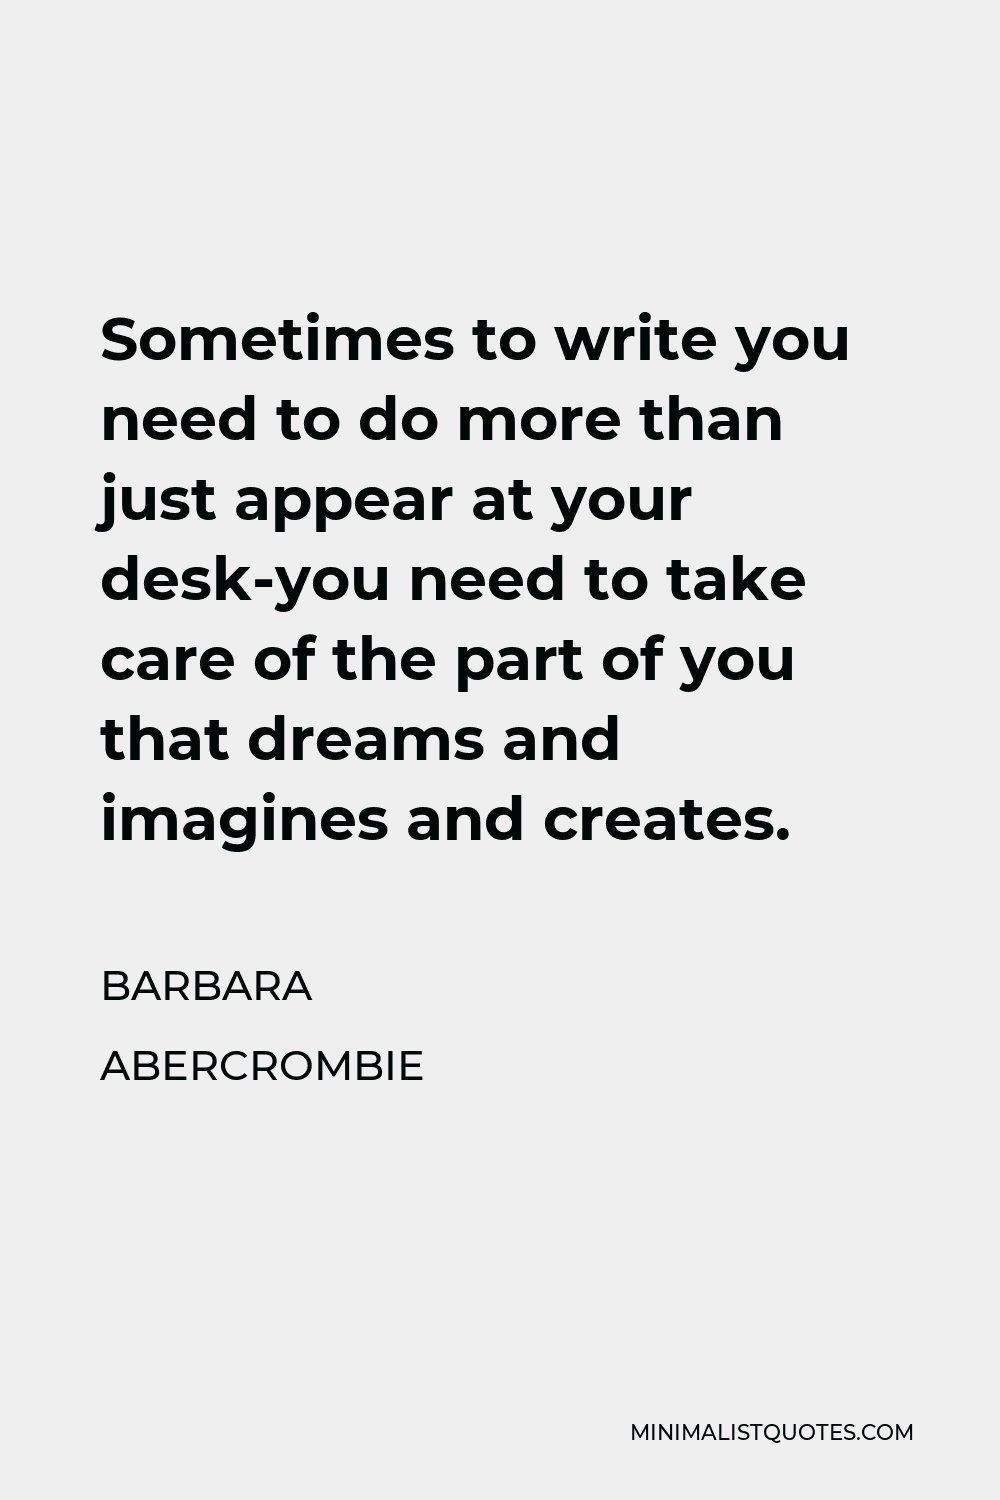 Barbara Abercrombie Quote - Sometimes to write you need to do more than just appear at your desk-you need to take care of the part of you that dreams and imagines and creates.